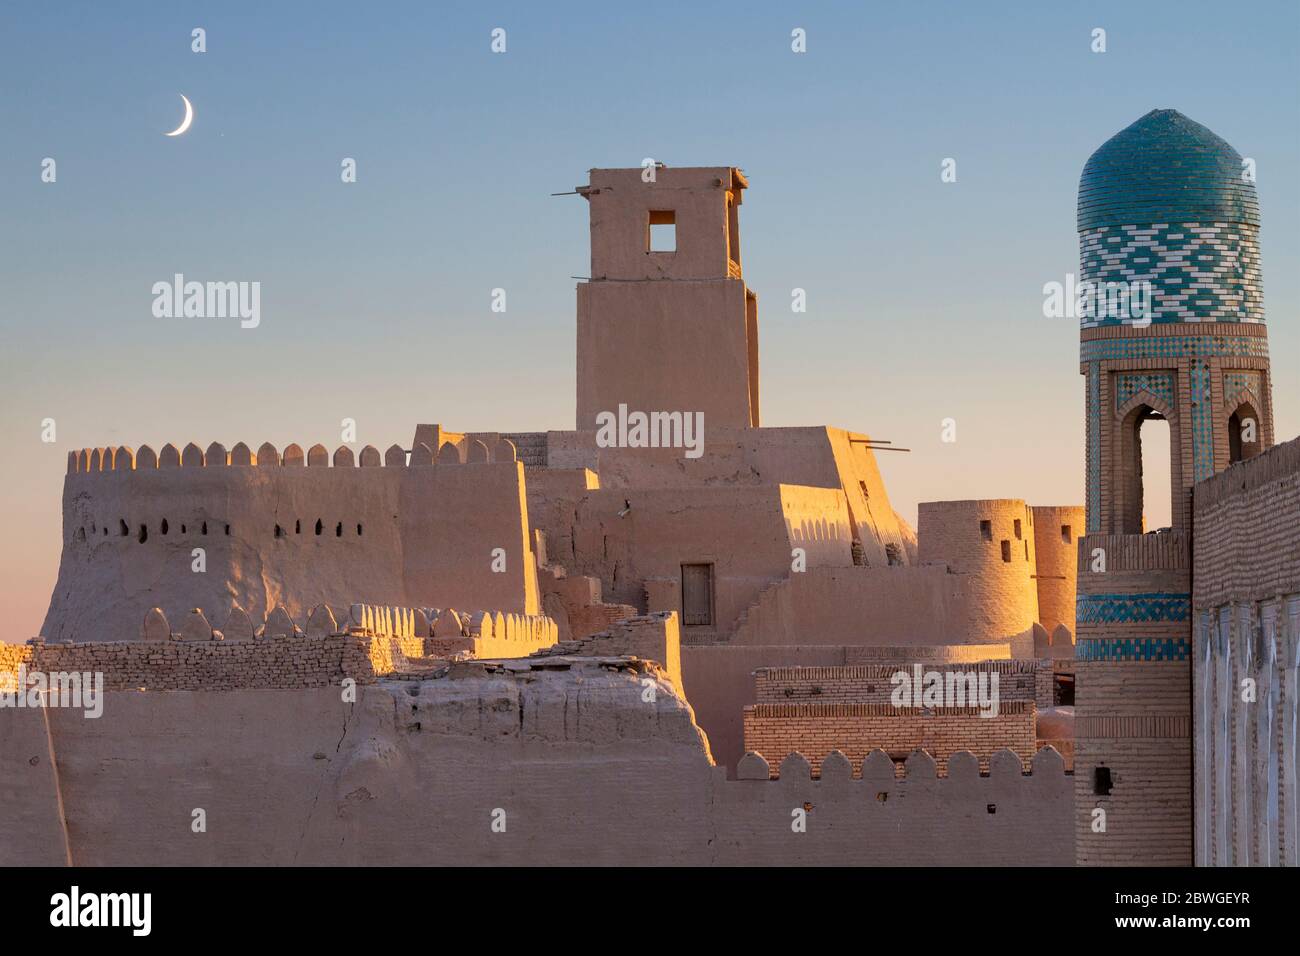 Tower and the old walls of the ancient city of Khiva with crescent moon in the sky, Uzbekistan Stock Photo